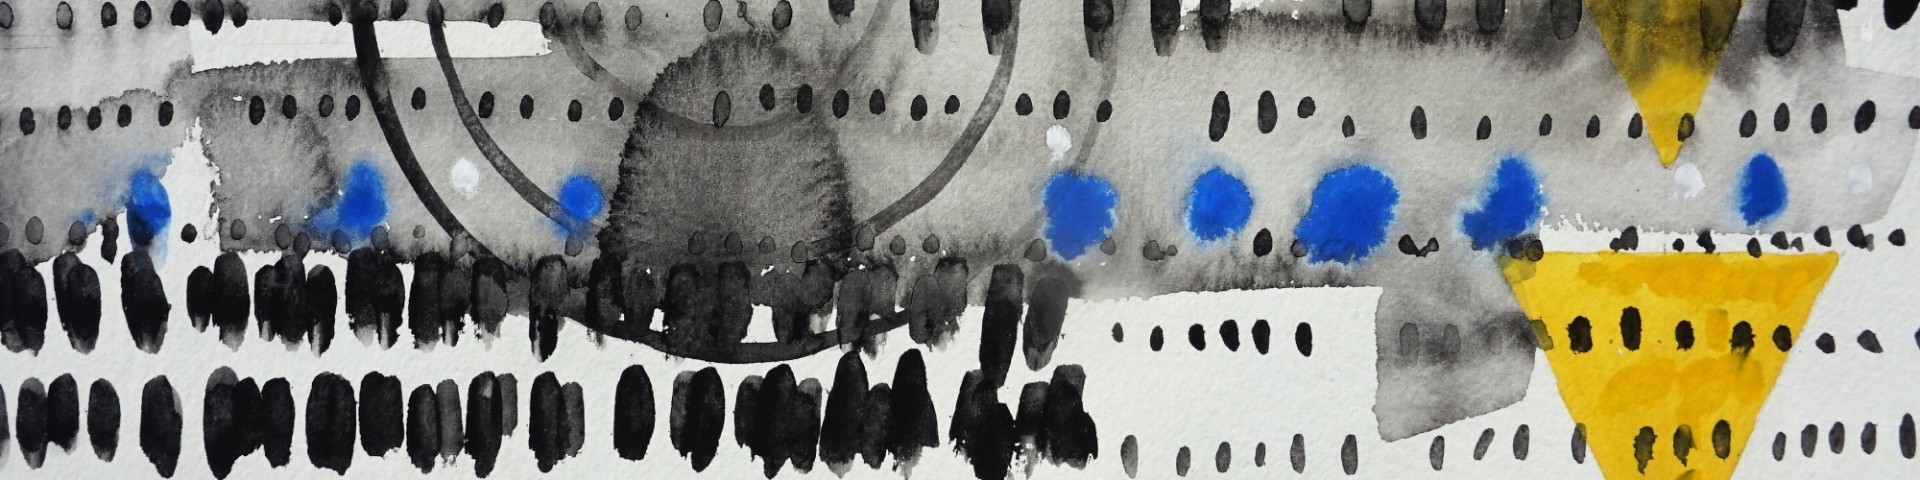 Abstract painting, slavery banner image (black dots, blue dots, yellow triangles)